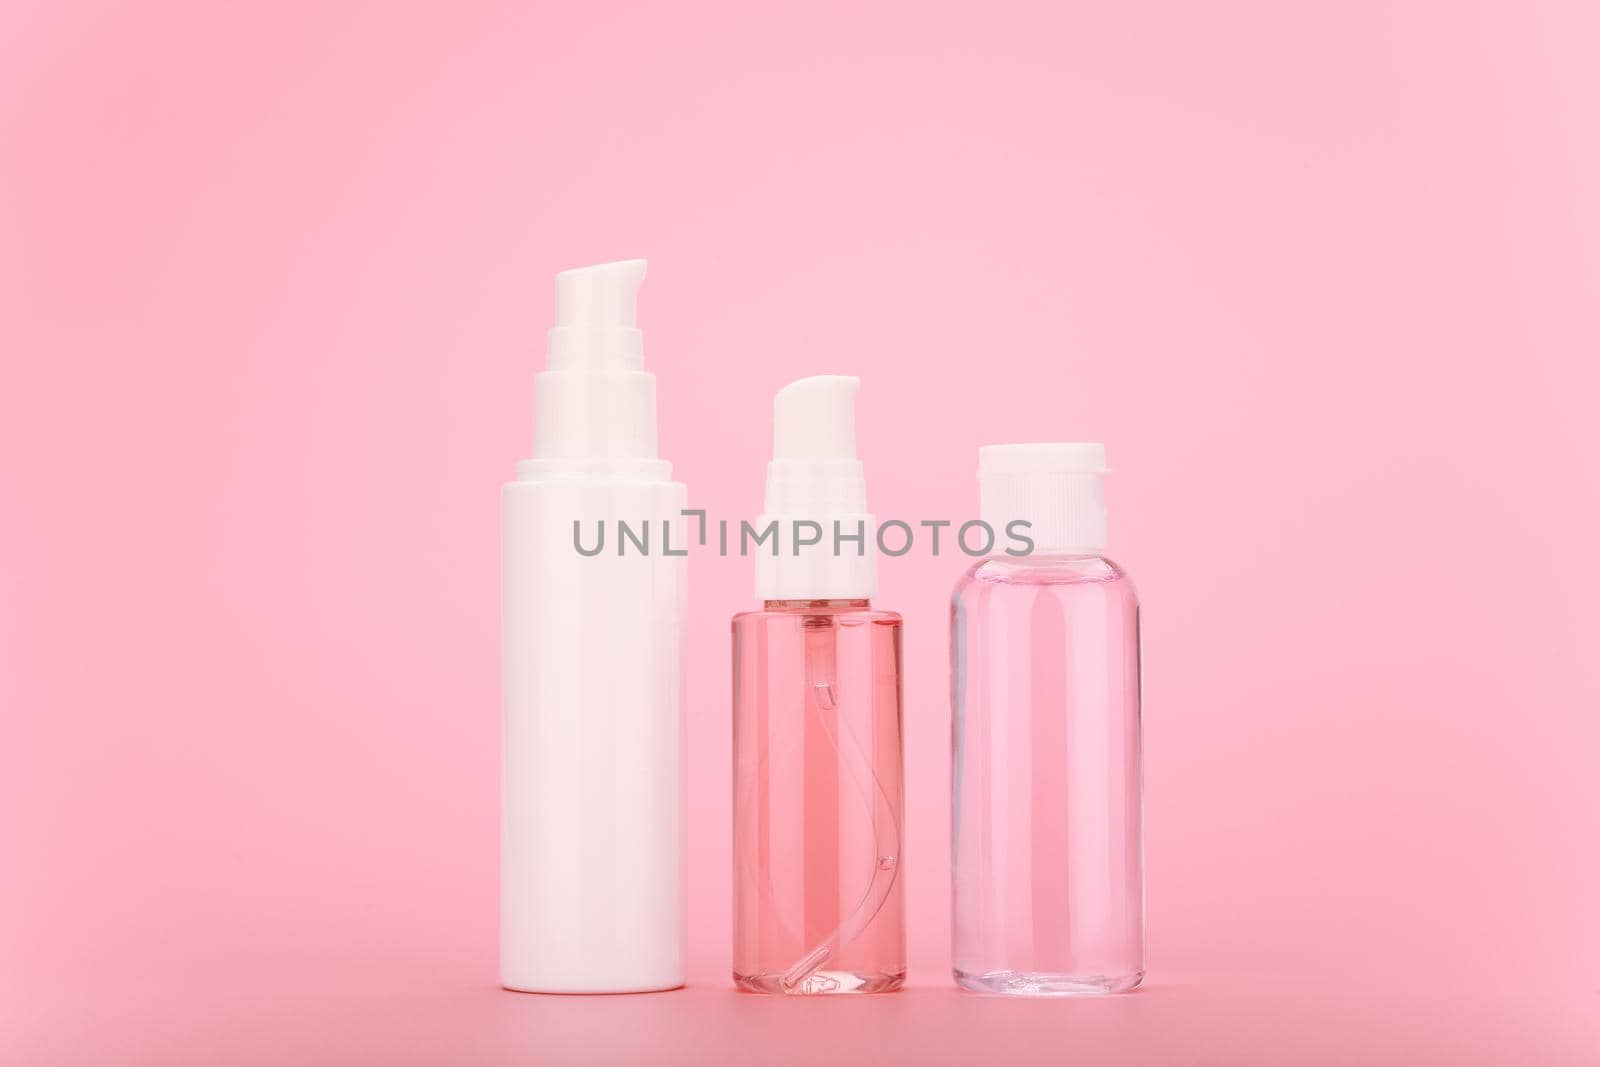 Face cream, cleaning foam or gel and lotion in transparent bottle with white caps against bright pink background by Senorina_Irina